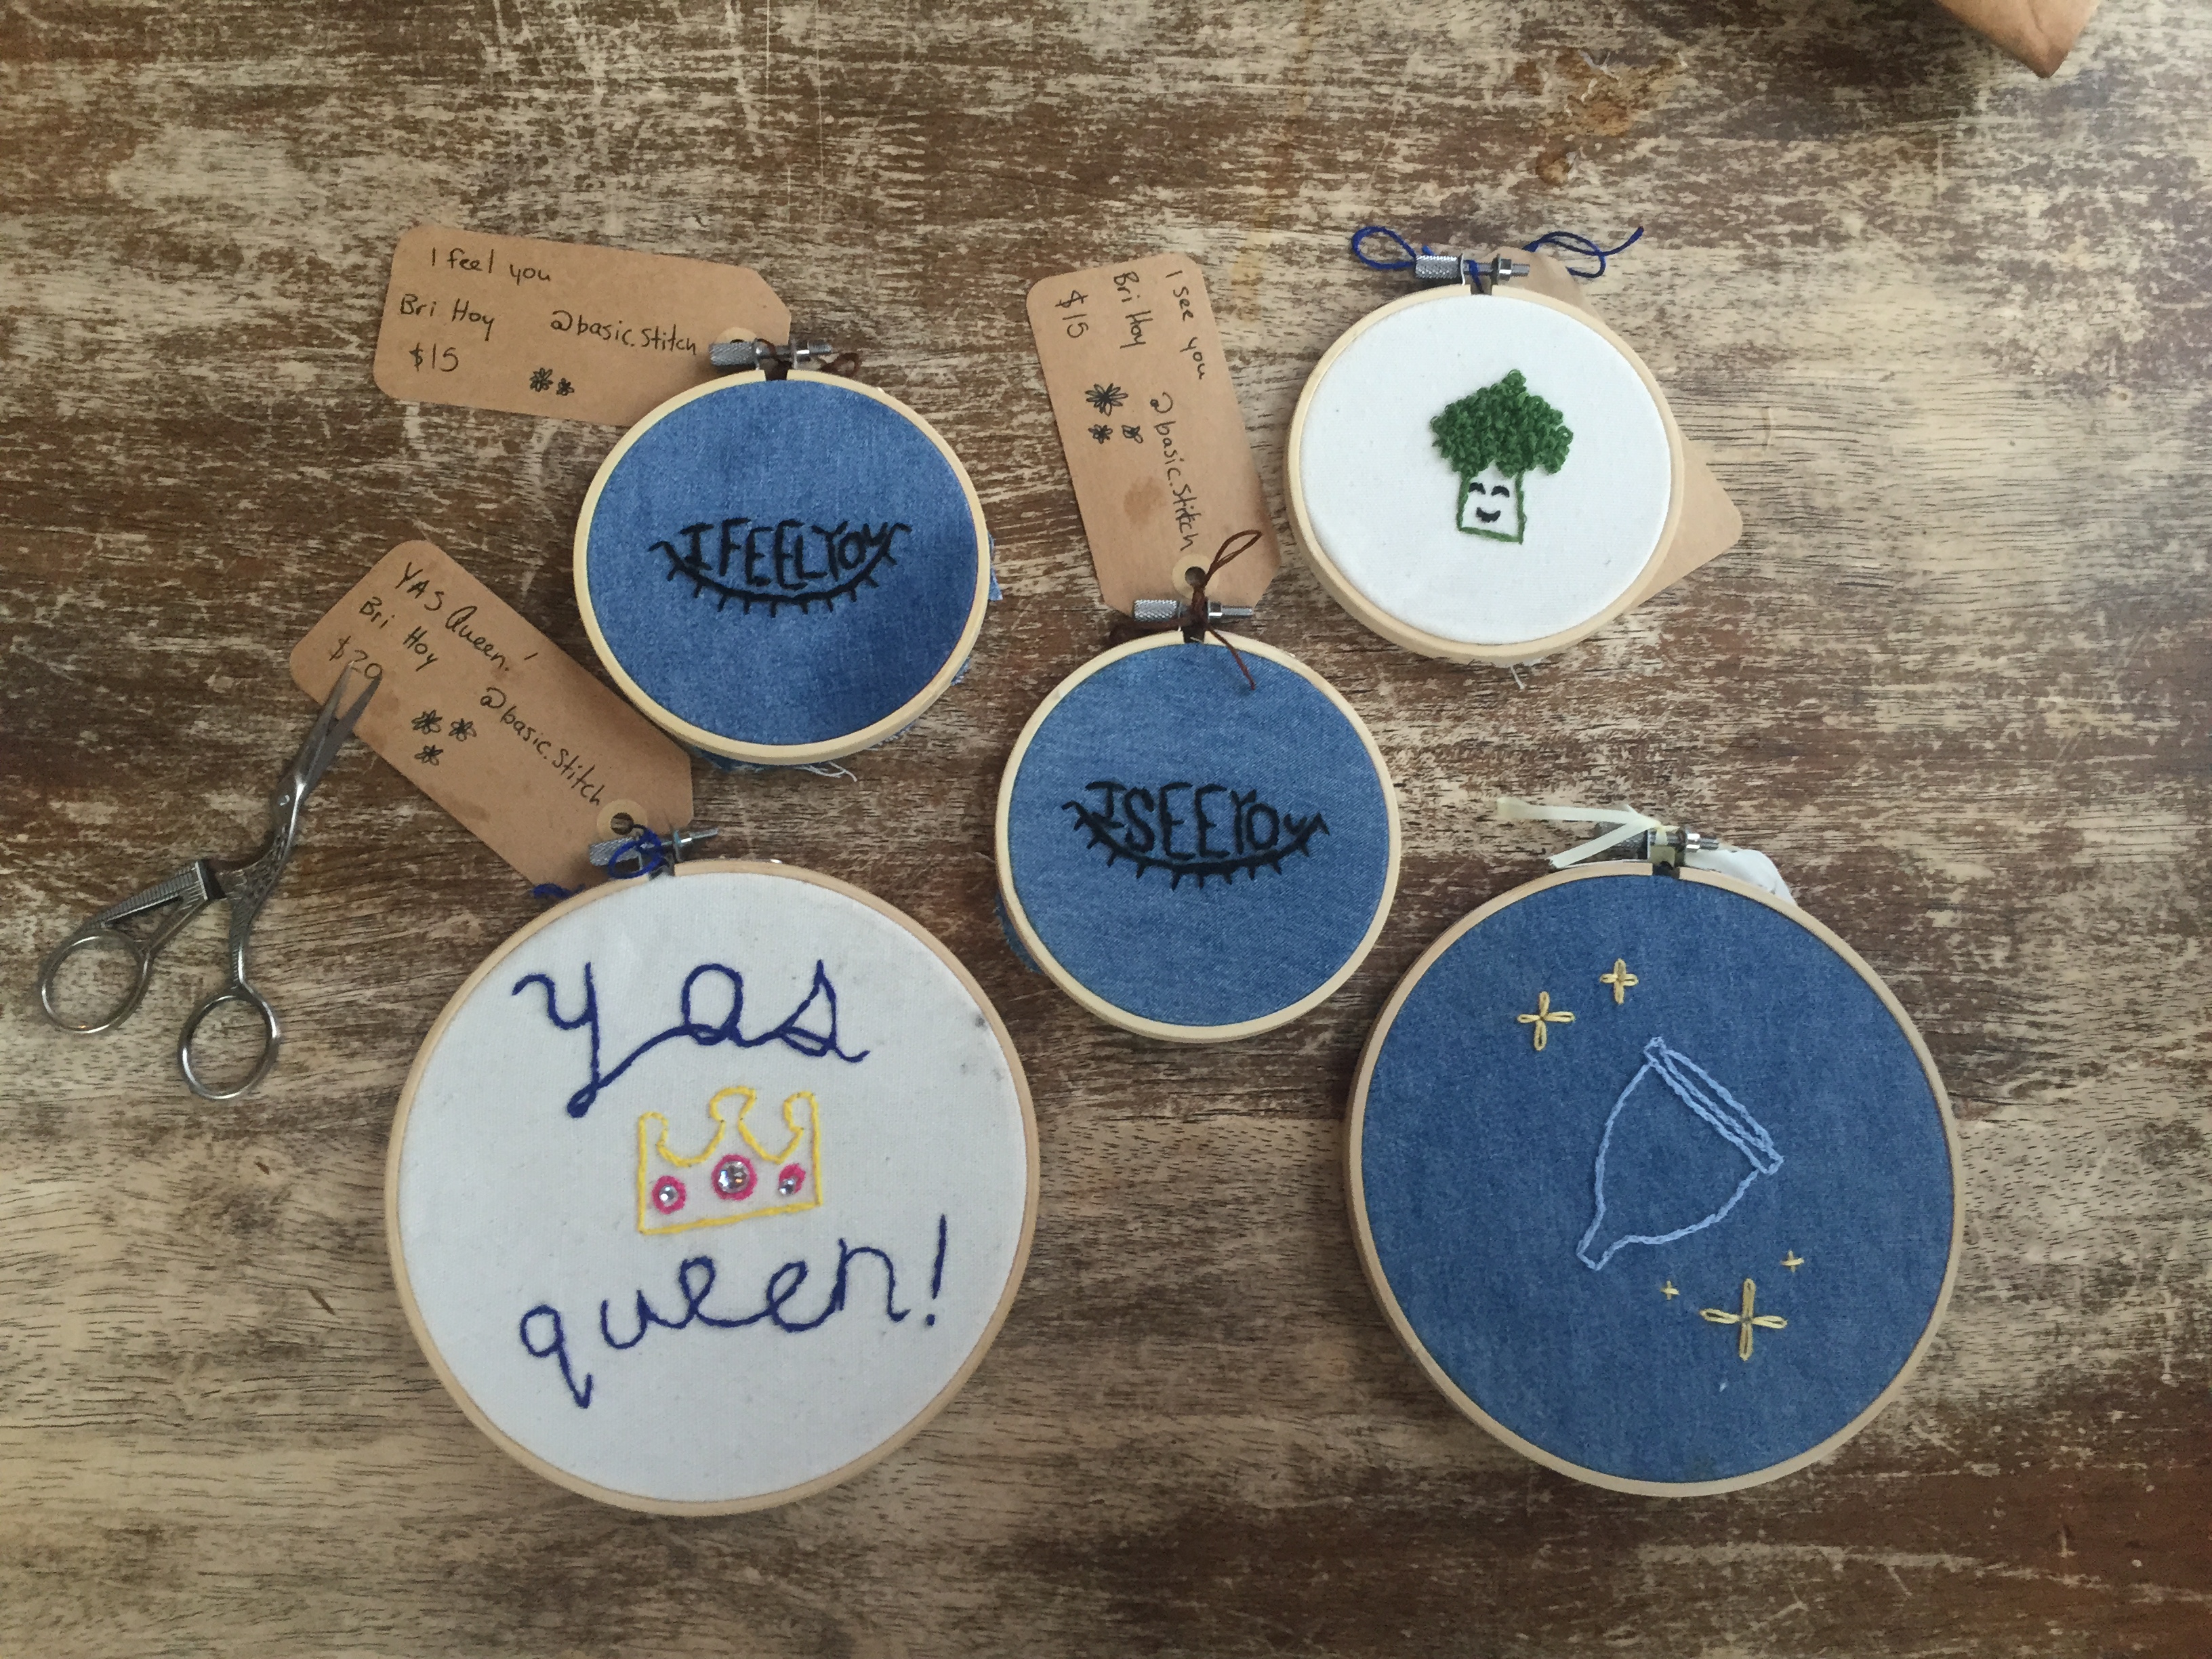 Five cross-stitch pieces on a wood table.